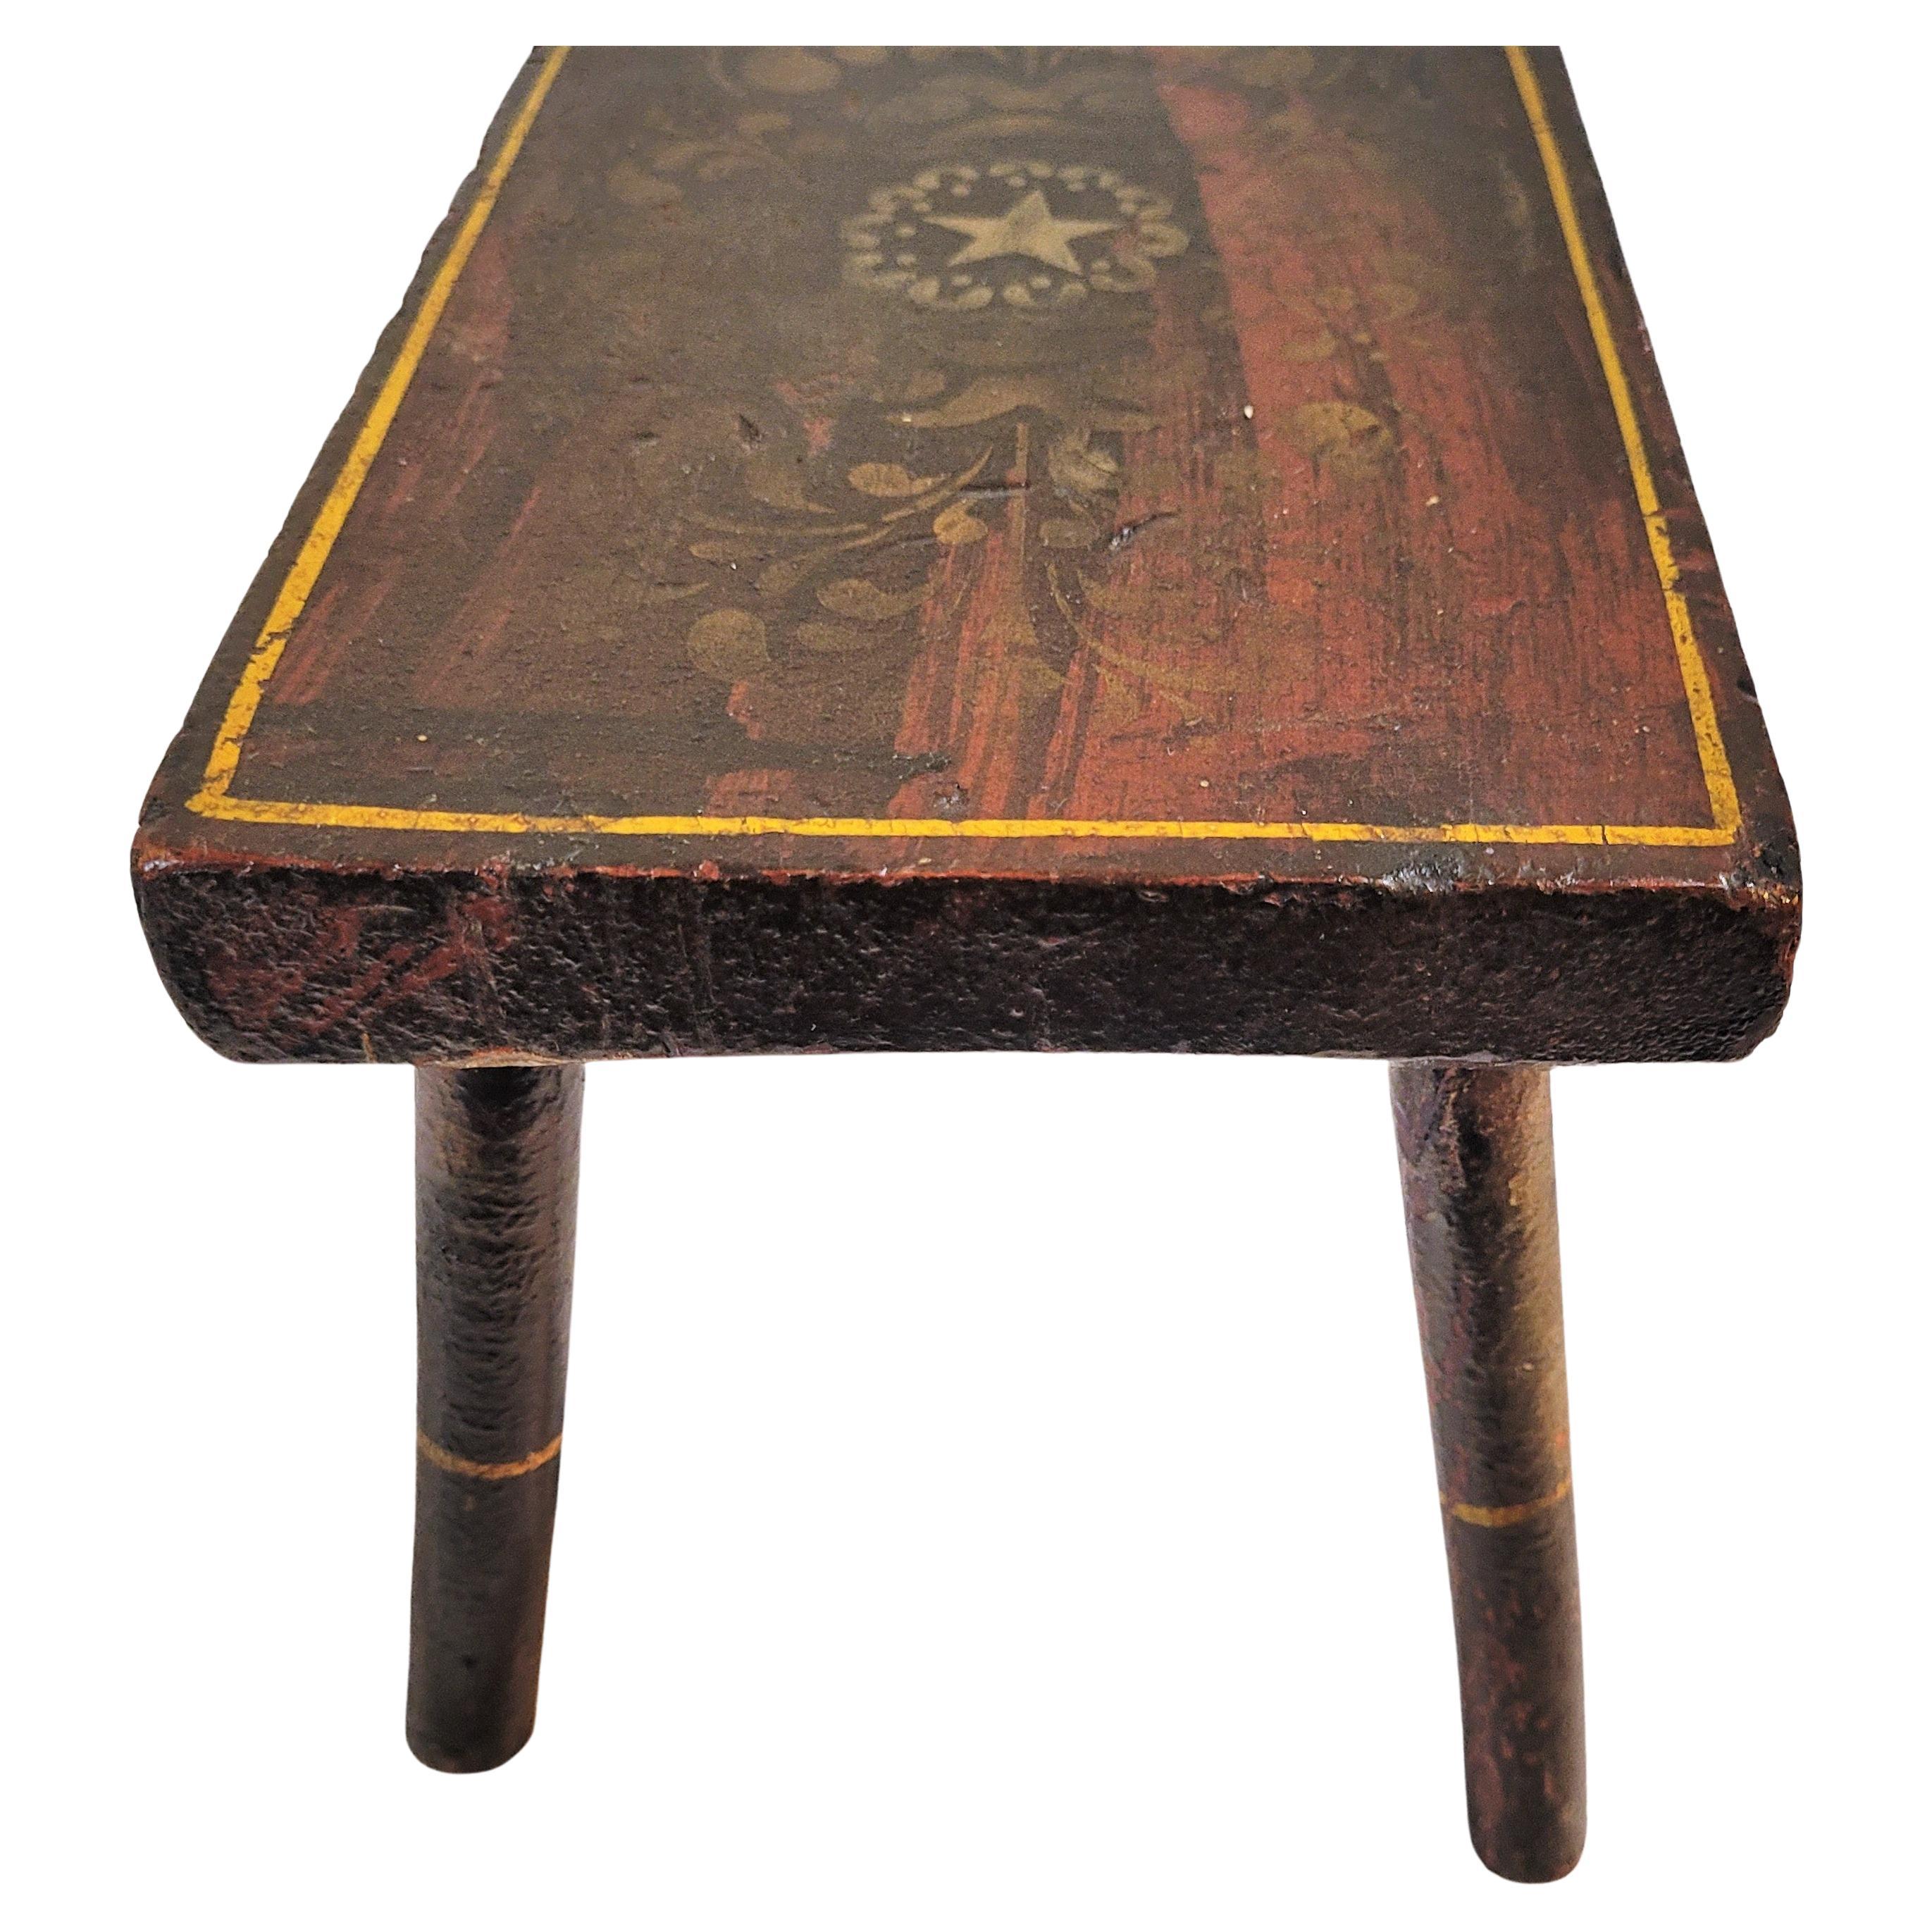 American 19th C Hand Painted Stencil Stool with Star